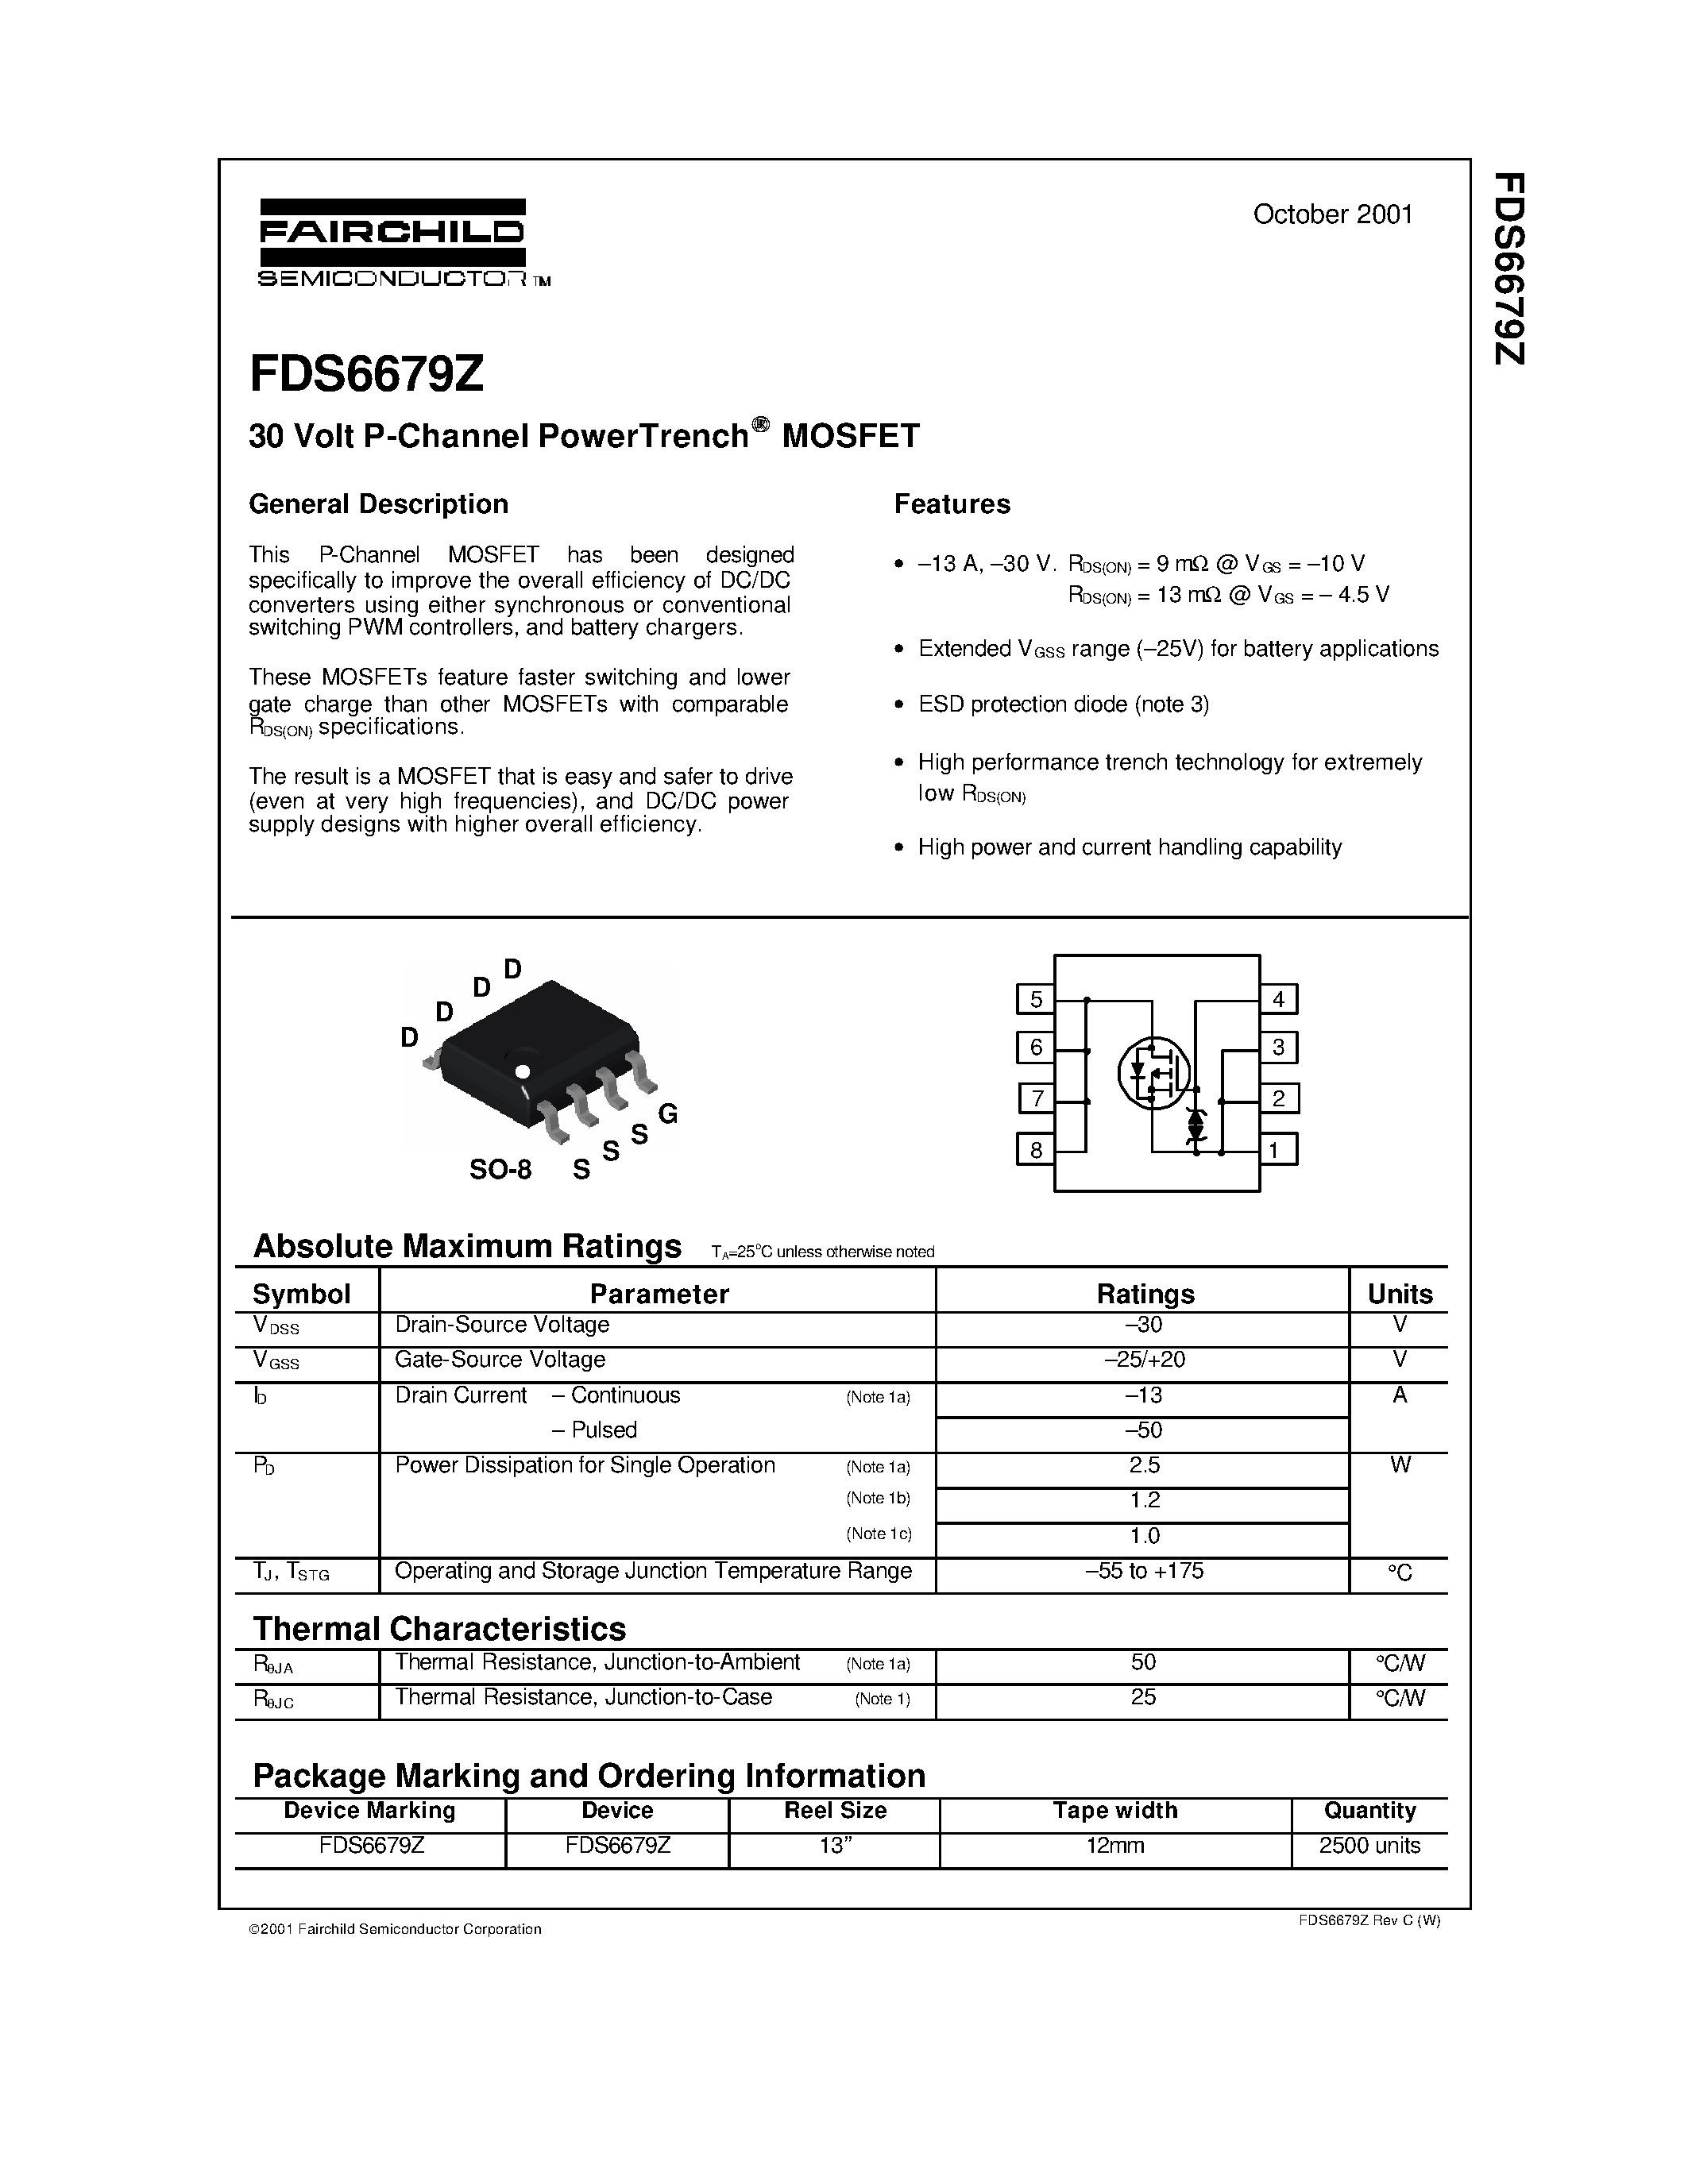 Datasheet FDS6679Z - 30 Volt P-Channel PowerTrench MOSFET page 1